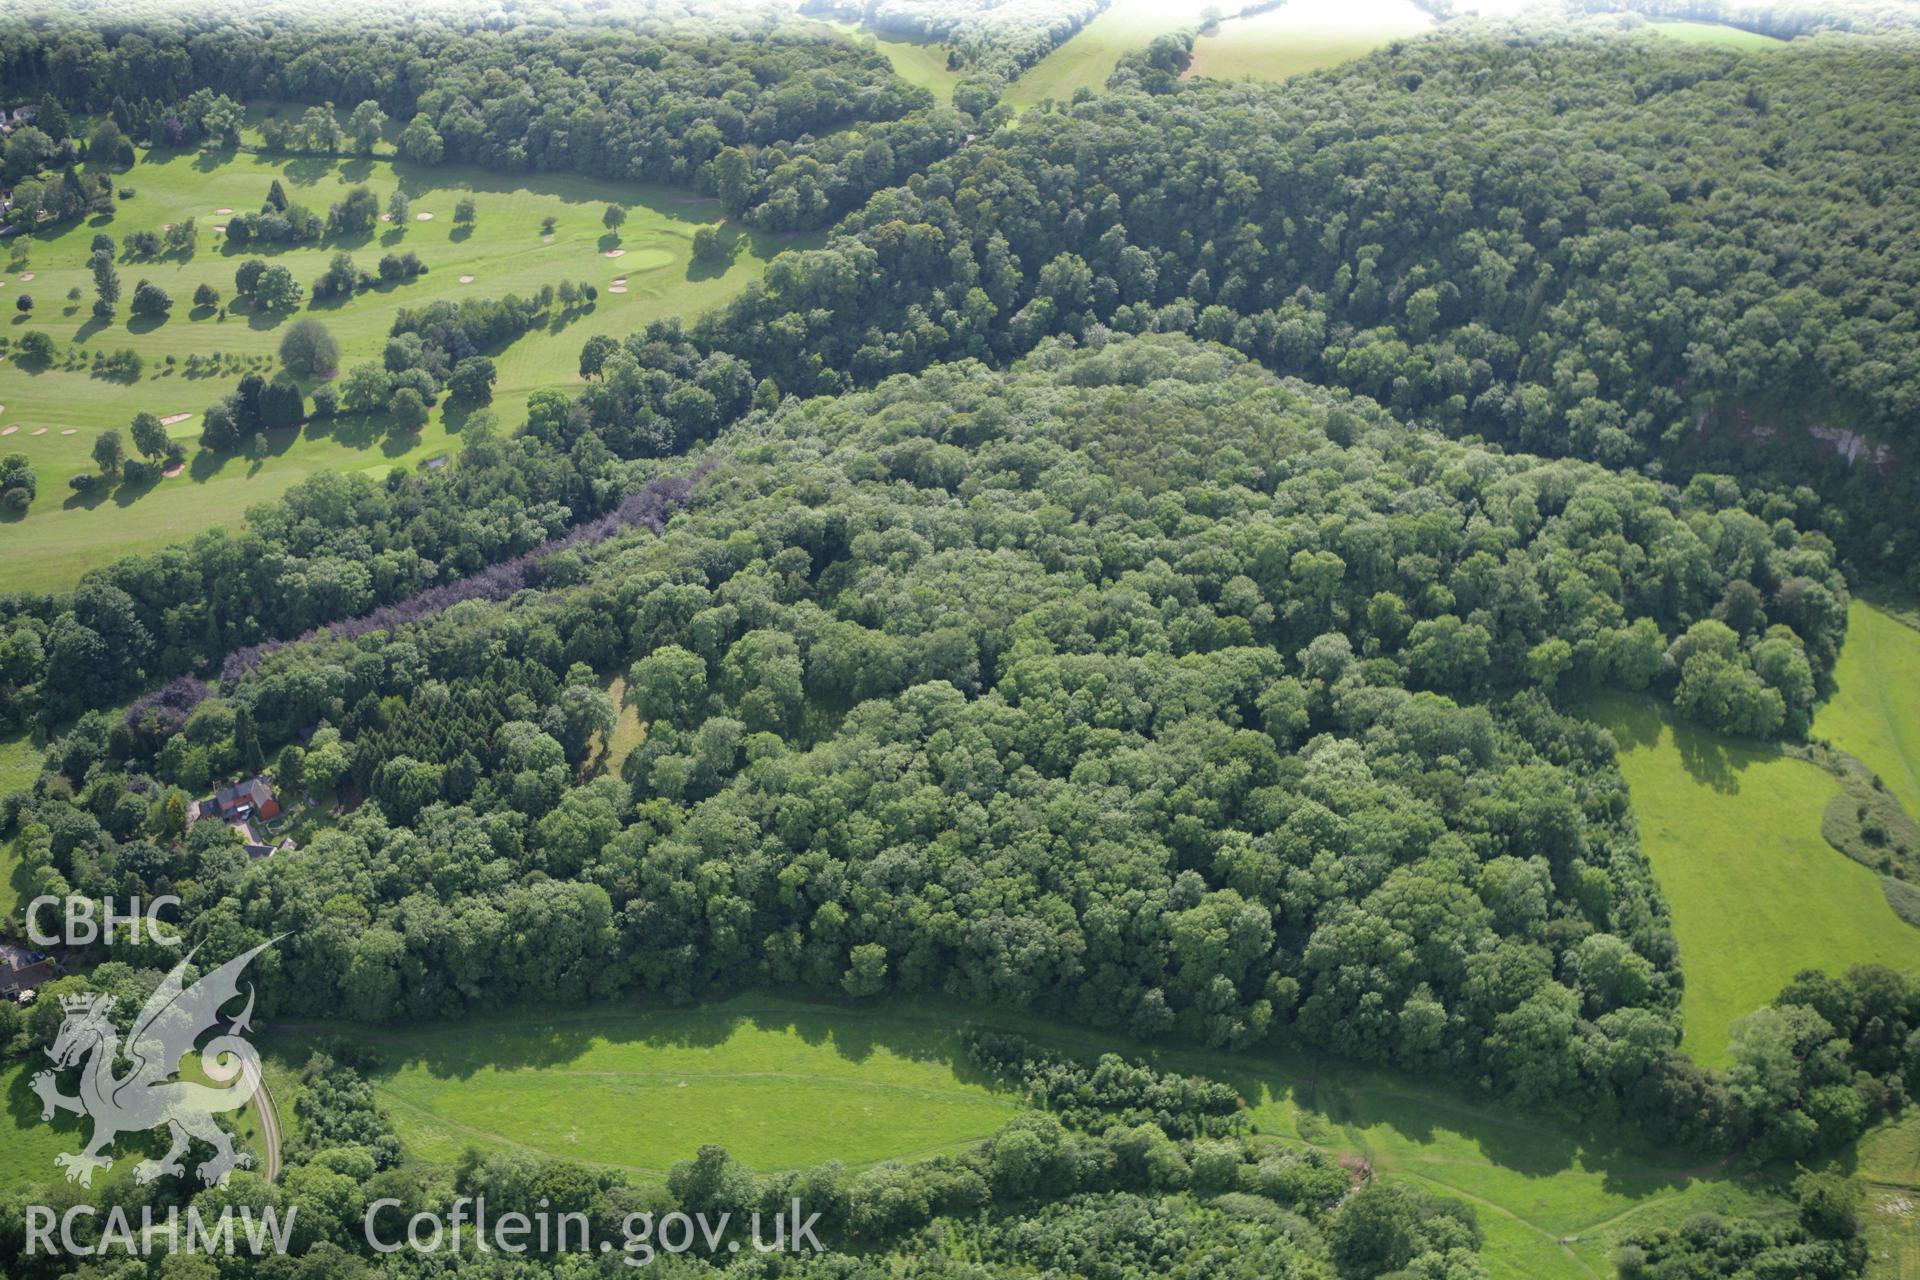 RCAHMW colour oblique photograph of Dinas Powys fort. Taken by Toby Driver on 13/06/2011.